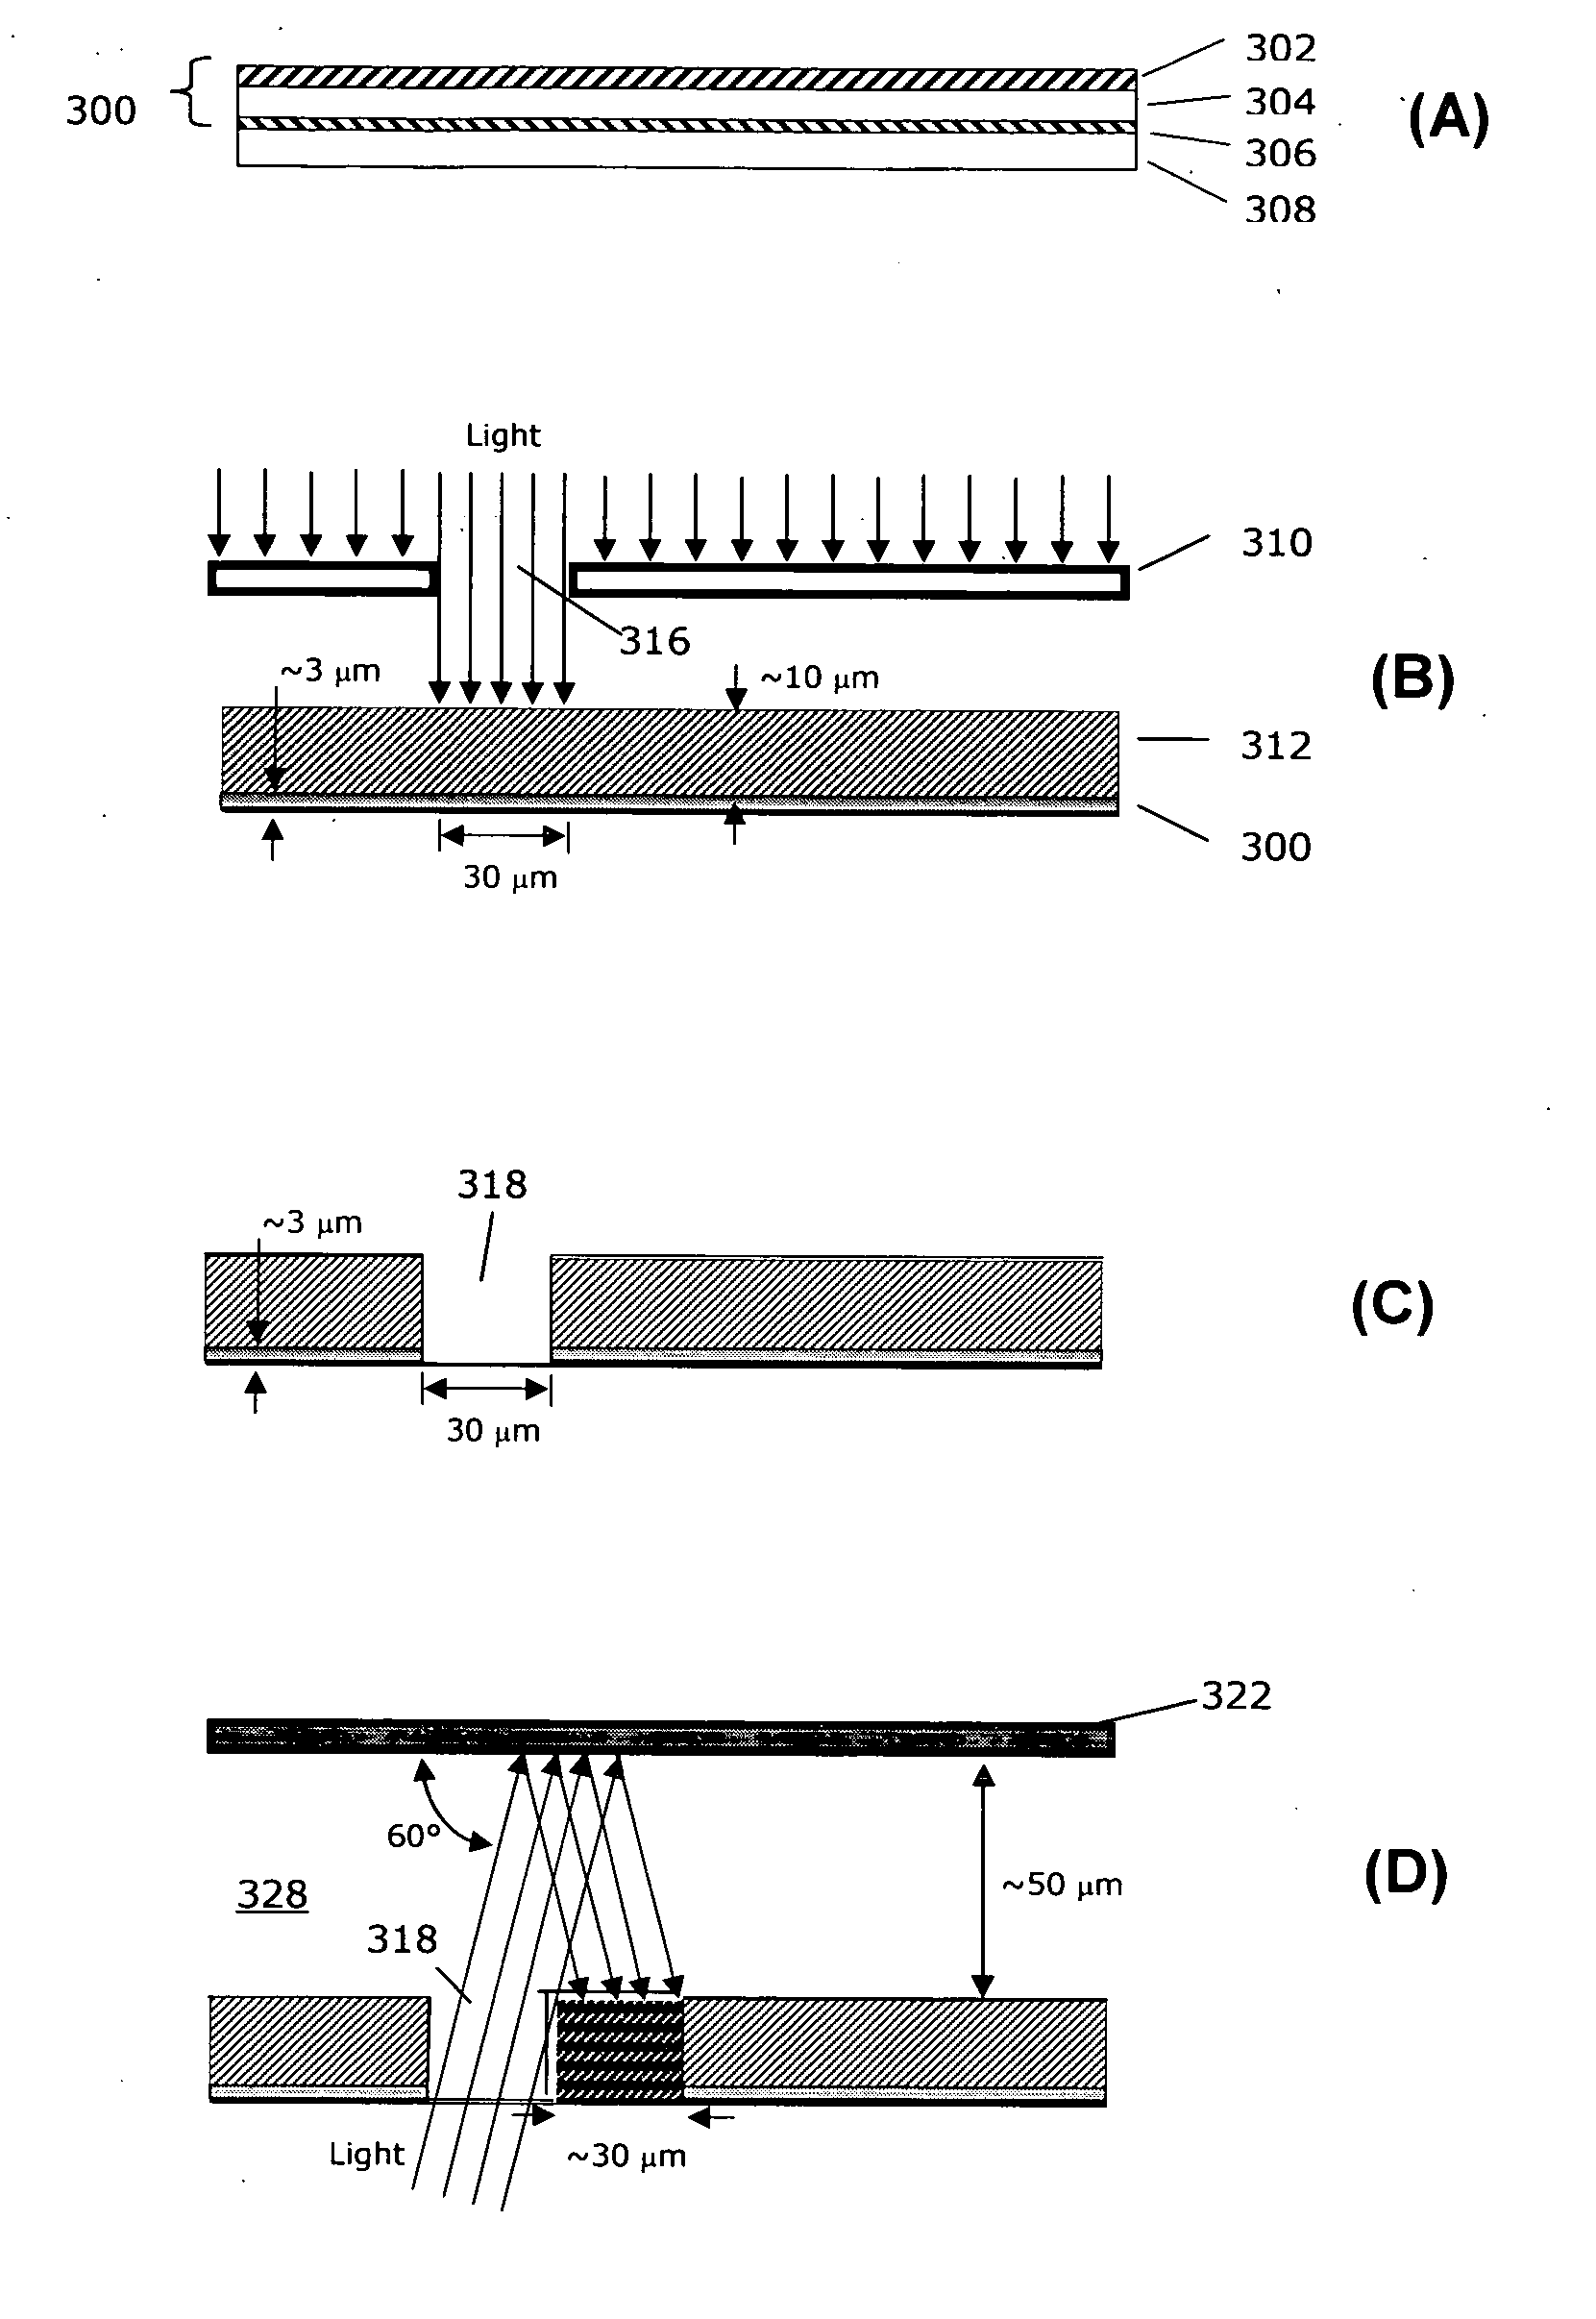 Method for forming thin film photovoltaic interconnects using self-aligned process